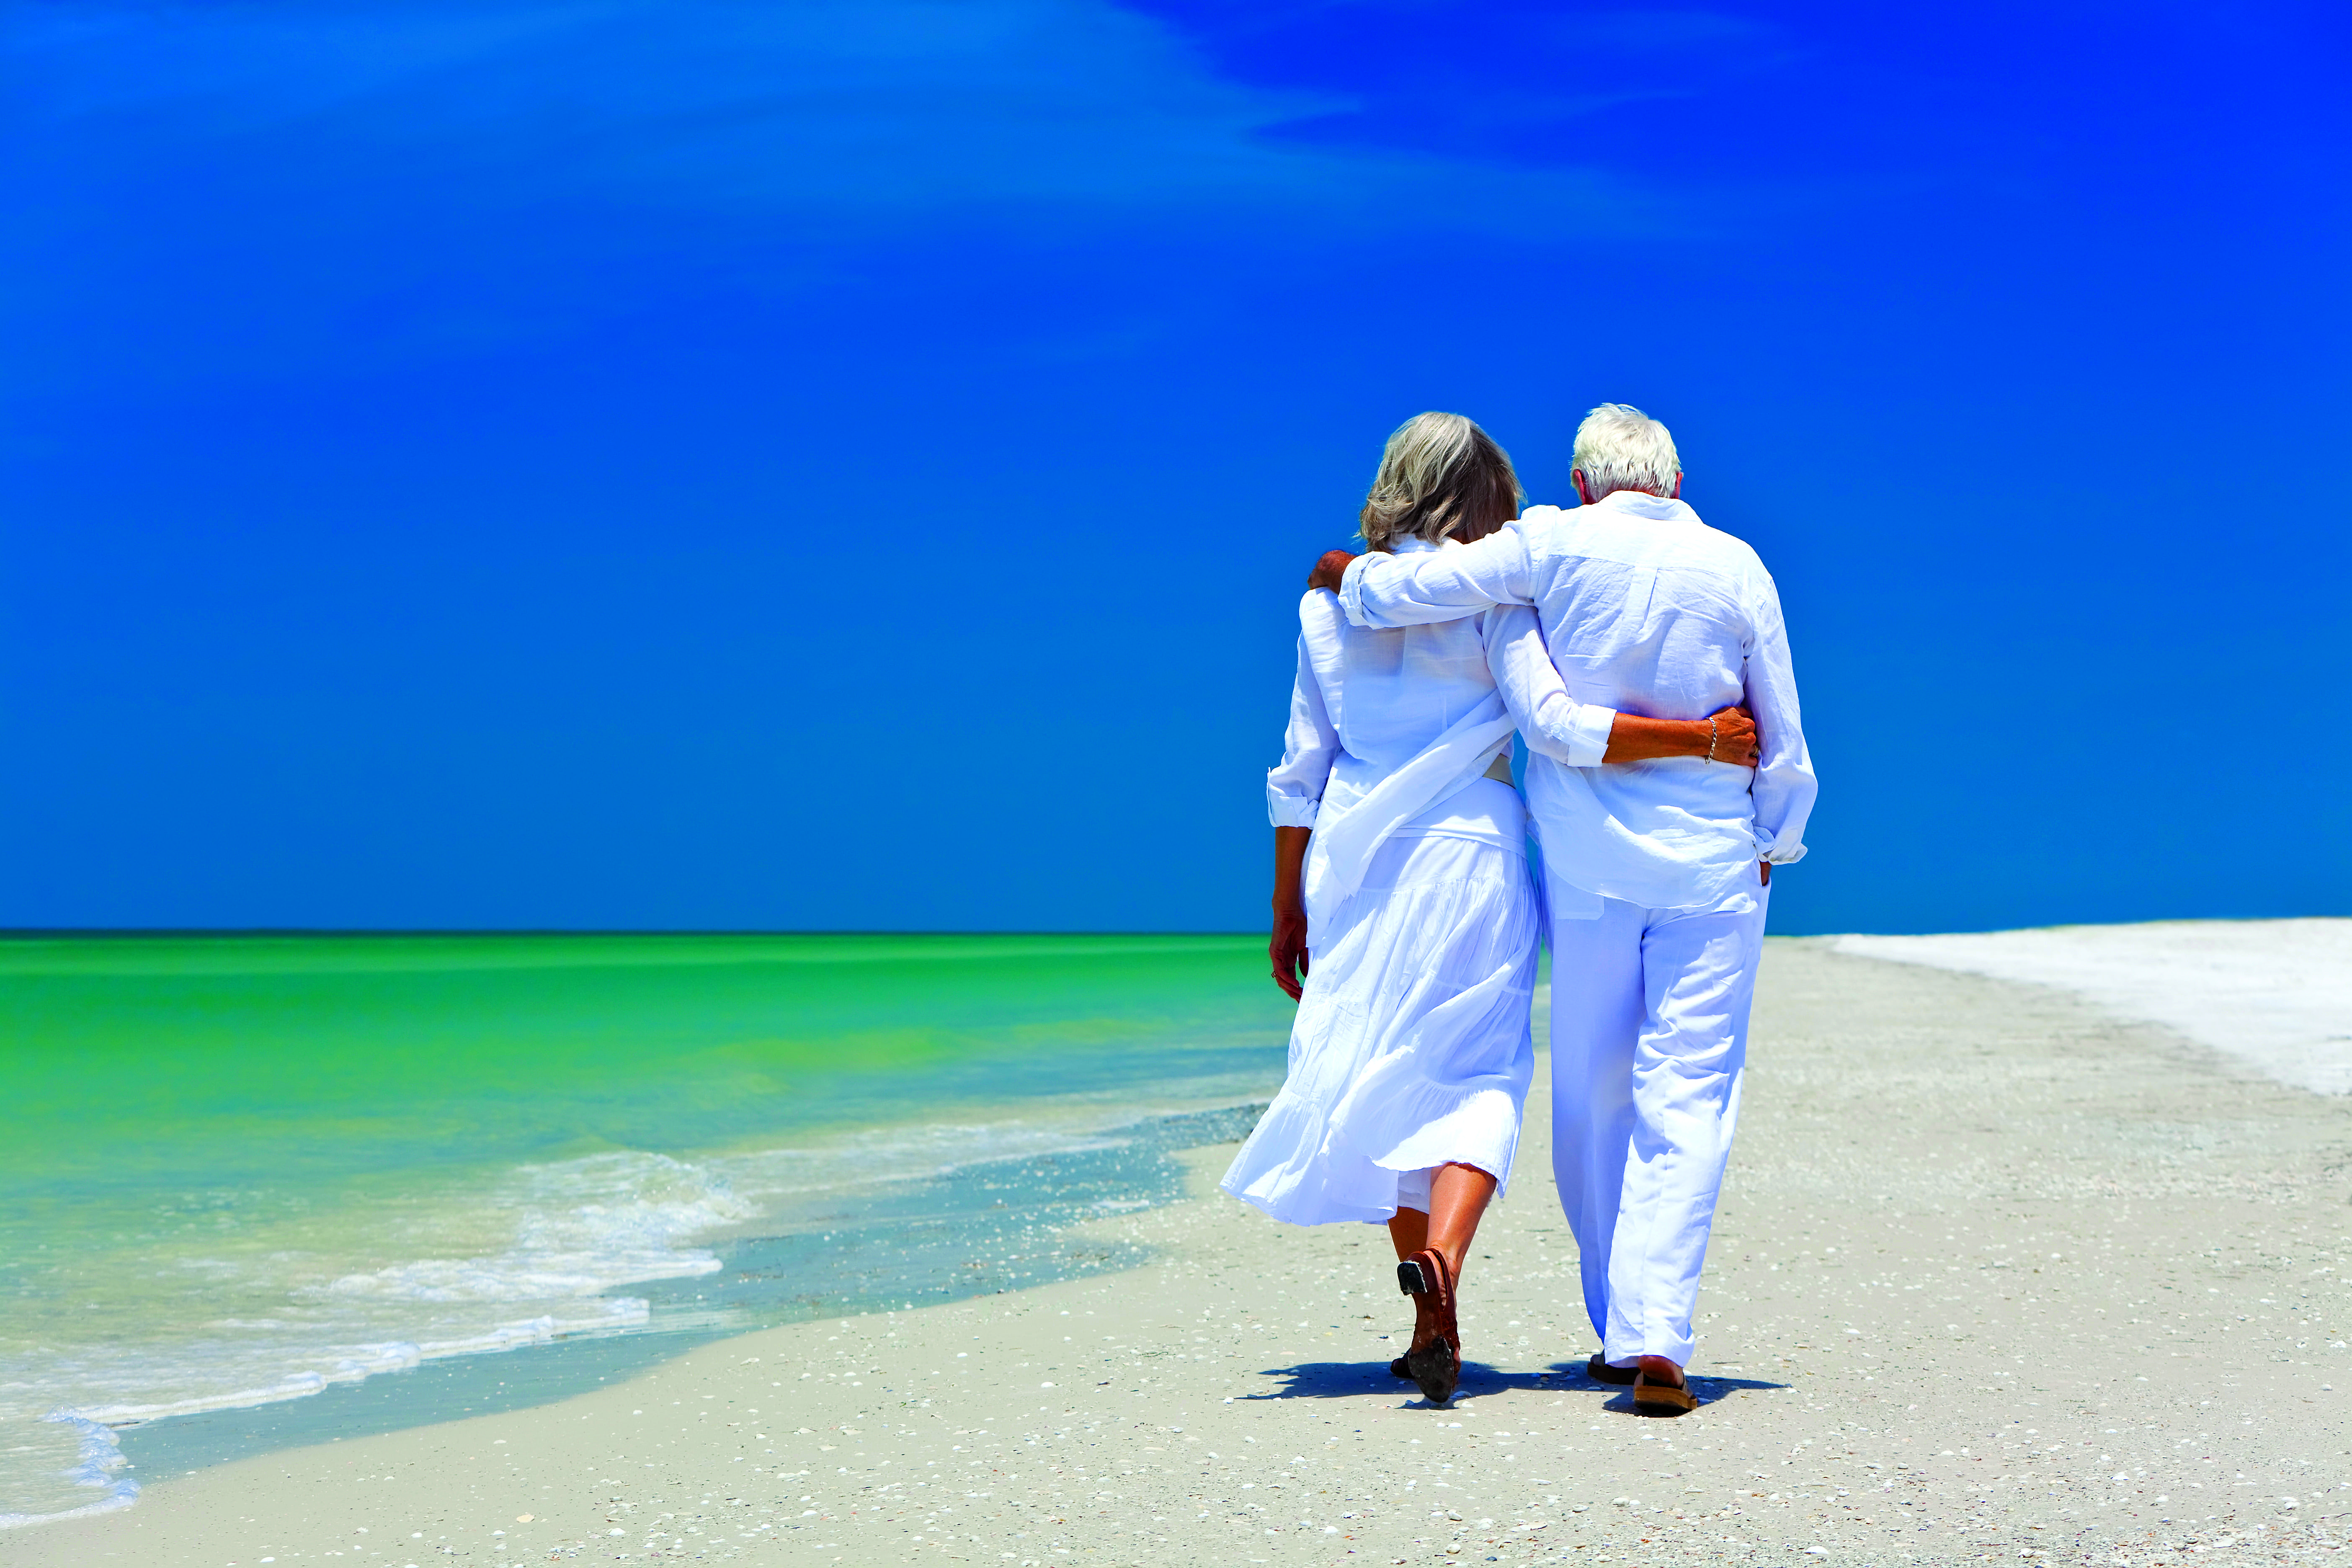 Man and woman walking side by side together on a beautiful beach